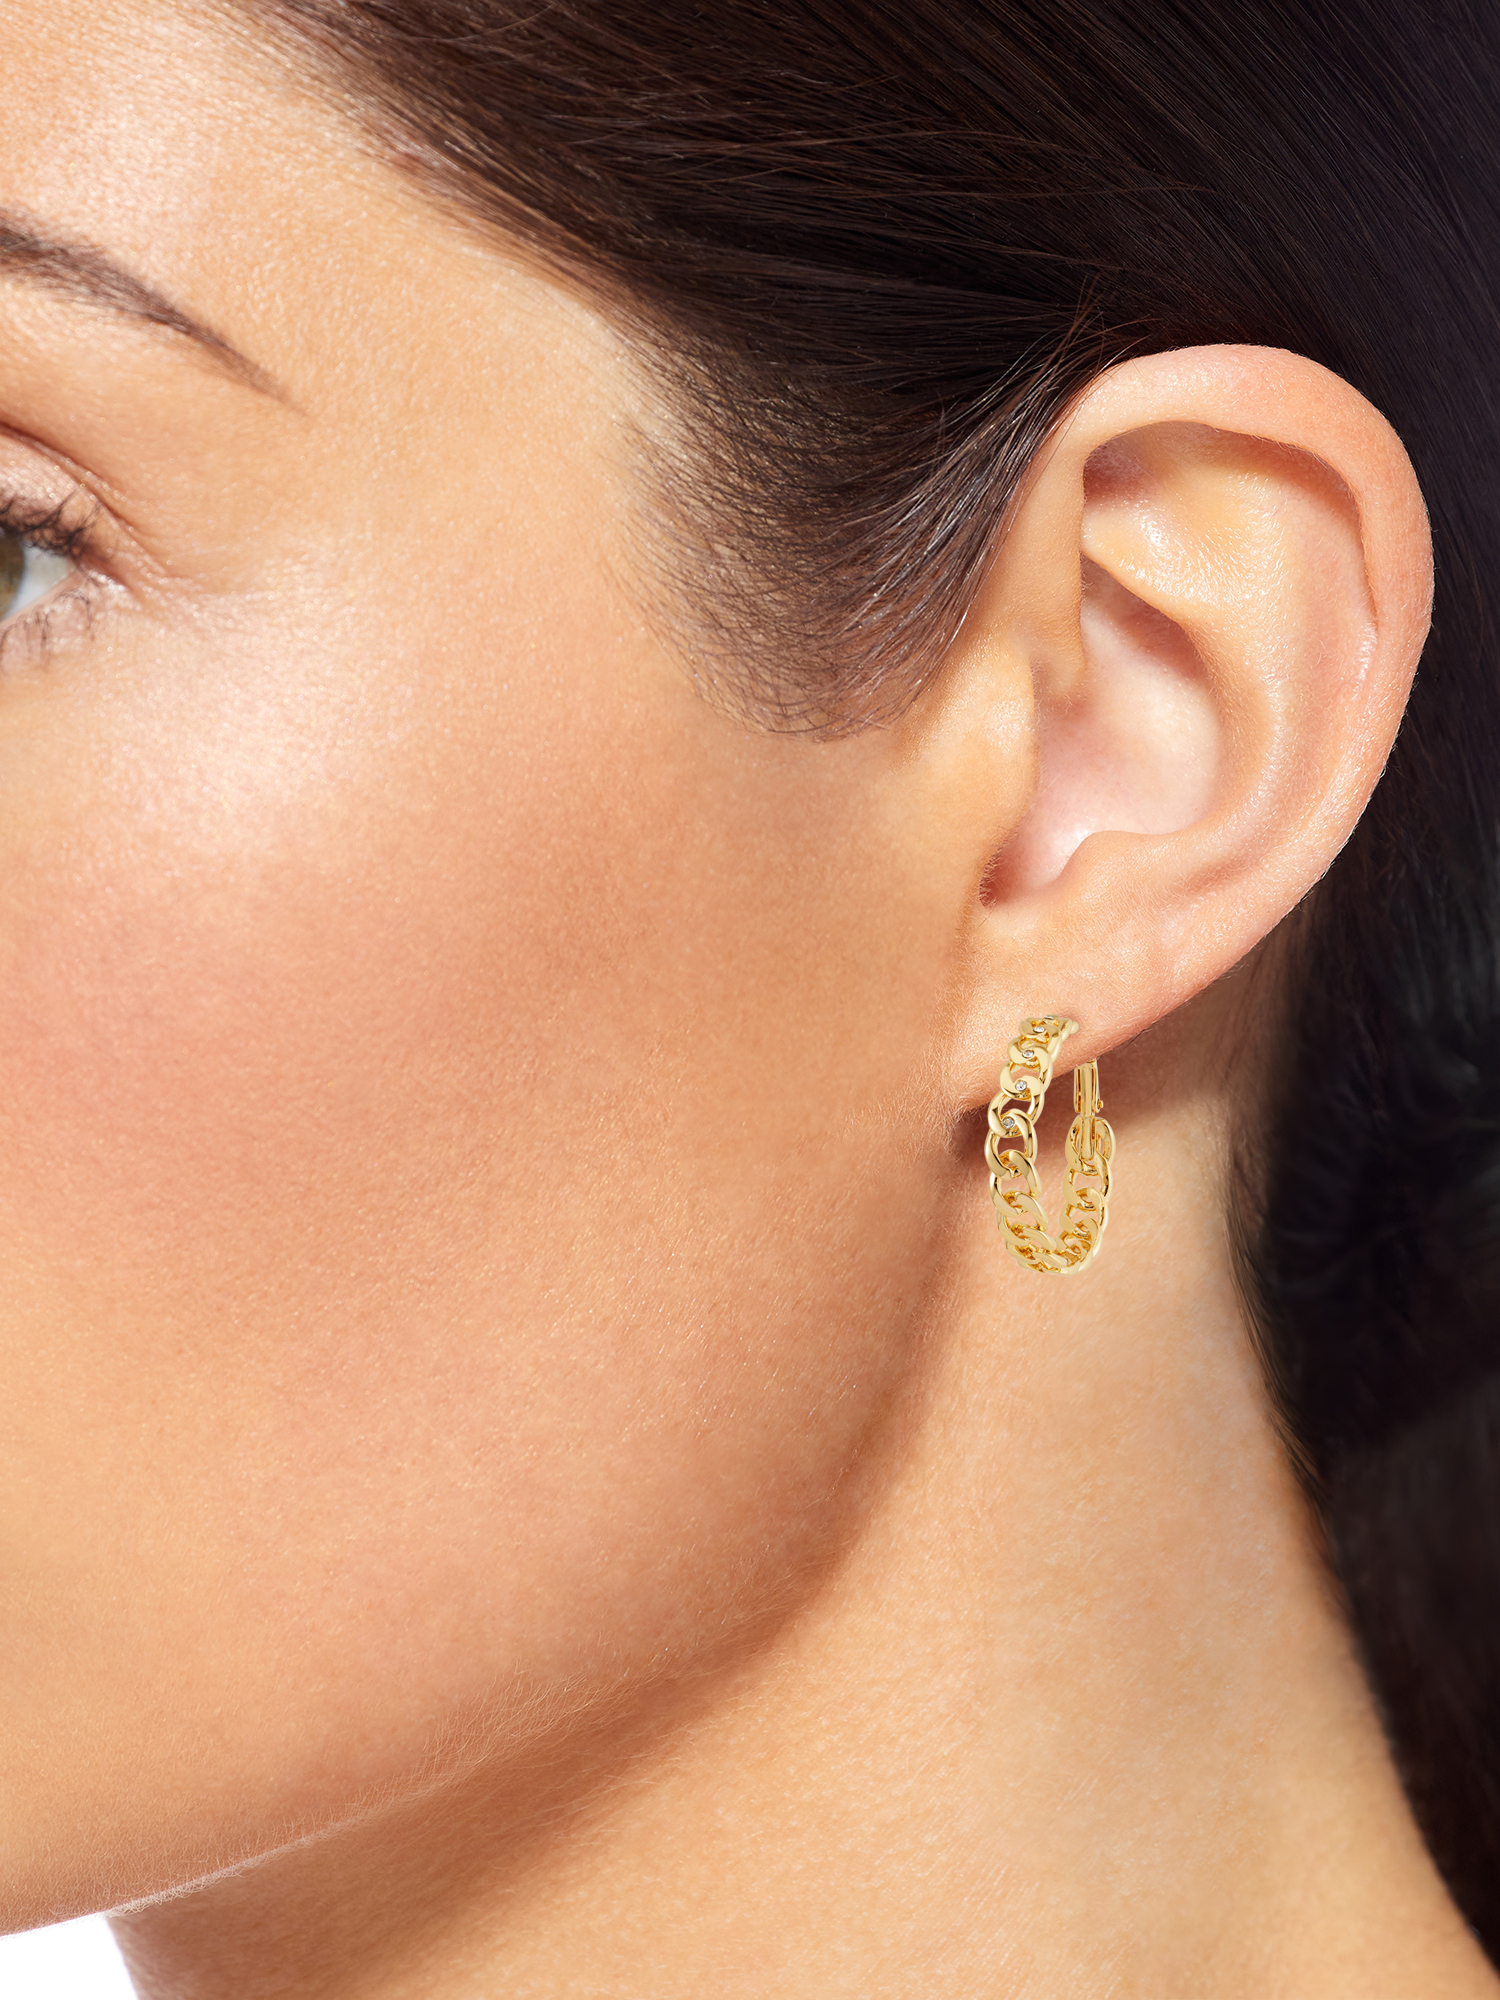 Scoop Brass Yellow Gold-Plated Chain Link Hoop Earrings - image 2 of 3